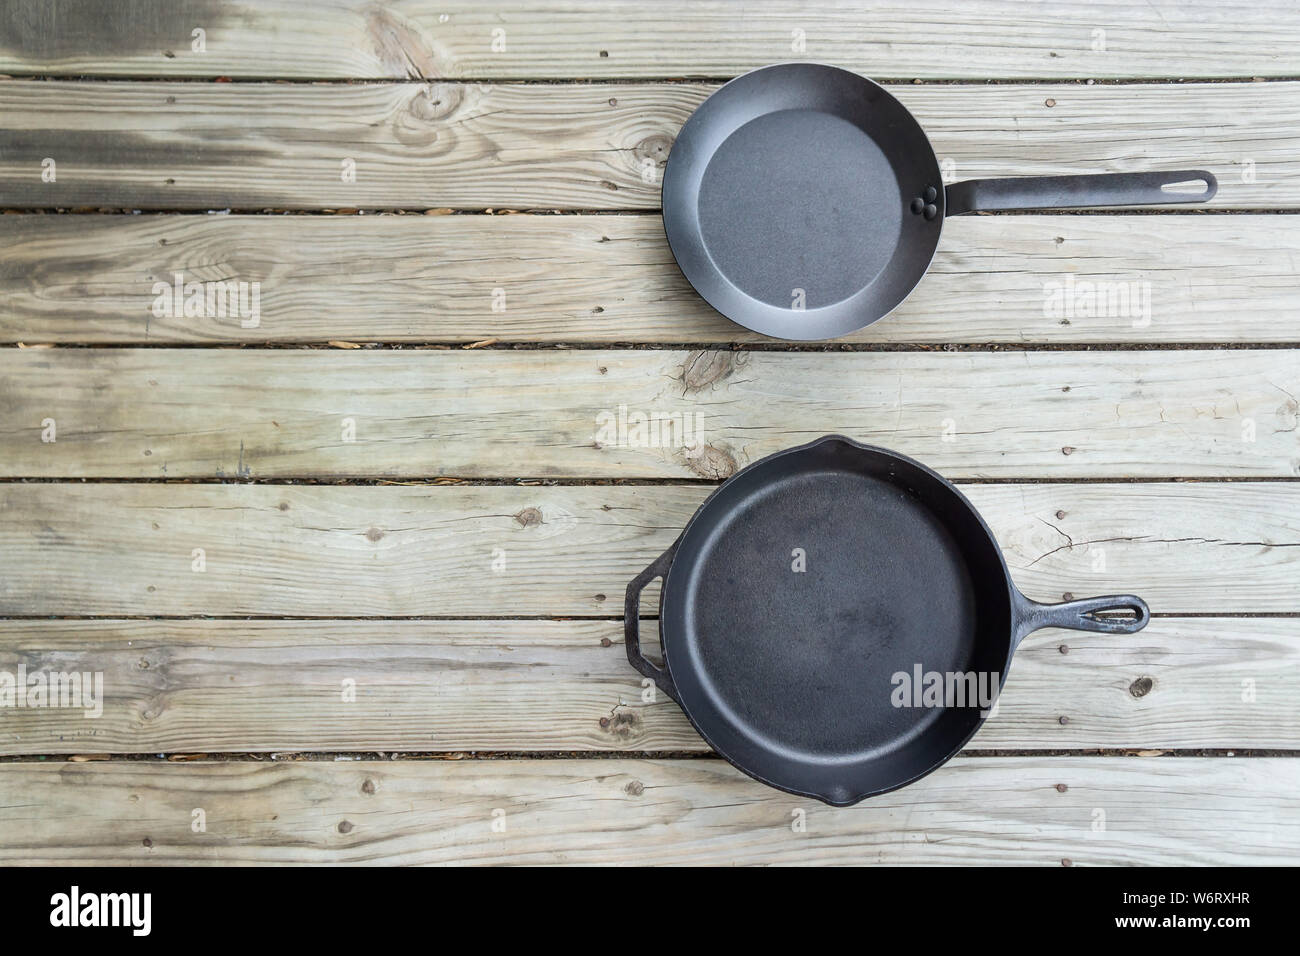 Cast iron vs carbon steel vs teflon pans. Skillet cookware battle comparison for healthier cooking options from stove to oven to campfire. Blank empty Stock Photo